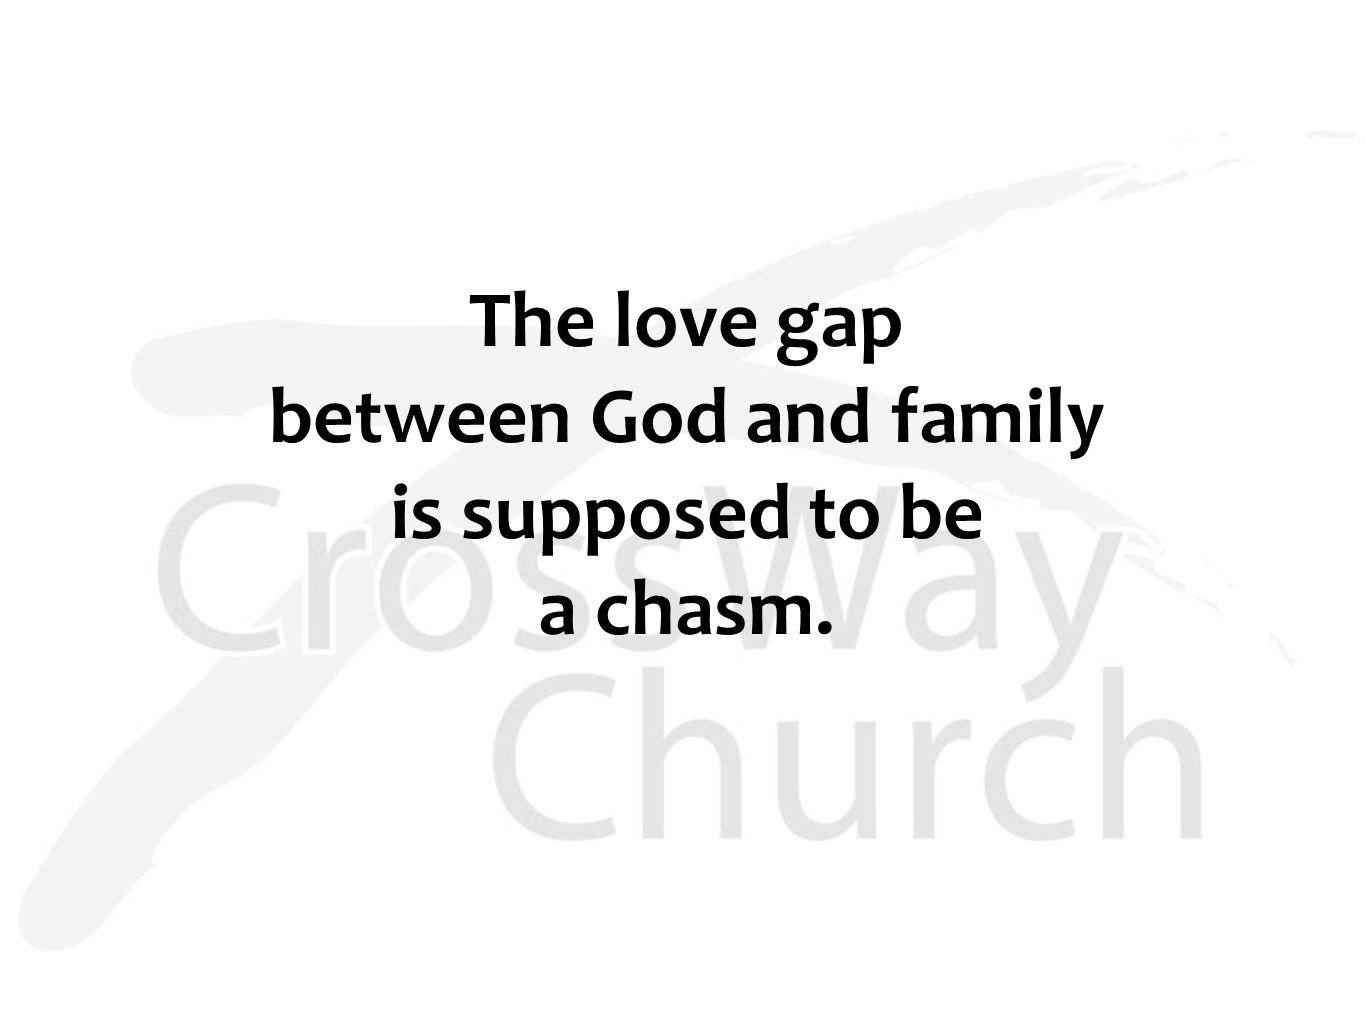 The love gap between God and family is supposed to be a chasm.